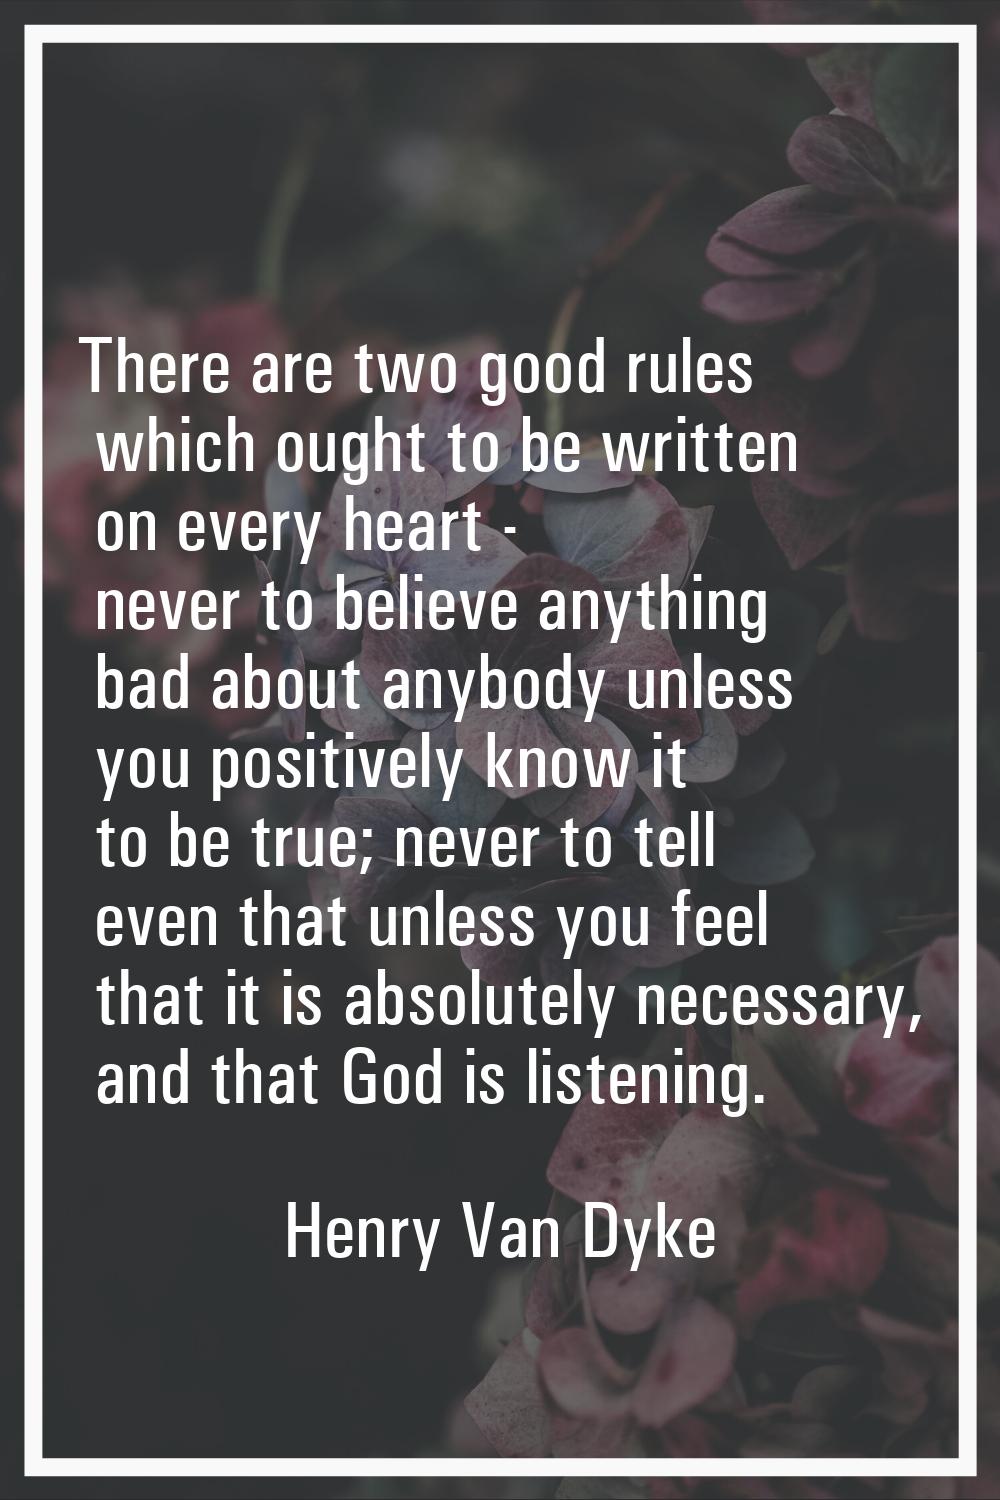 There are two good rules which ought to be written on every heart - never to believe anything bad a